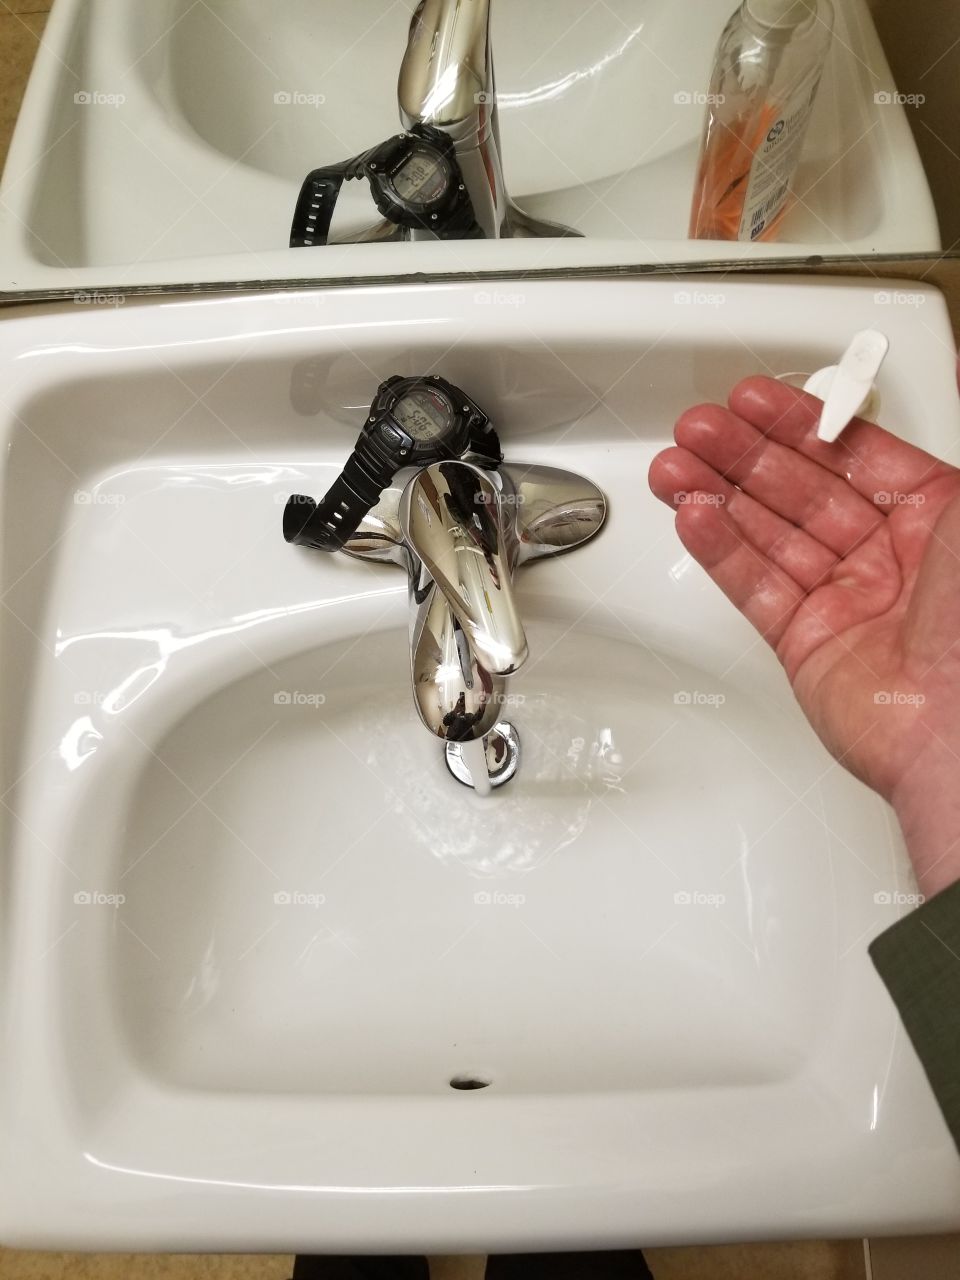 Time to wash hands